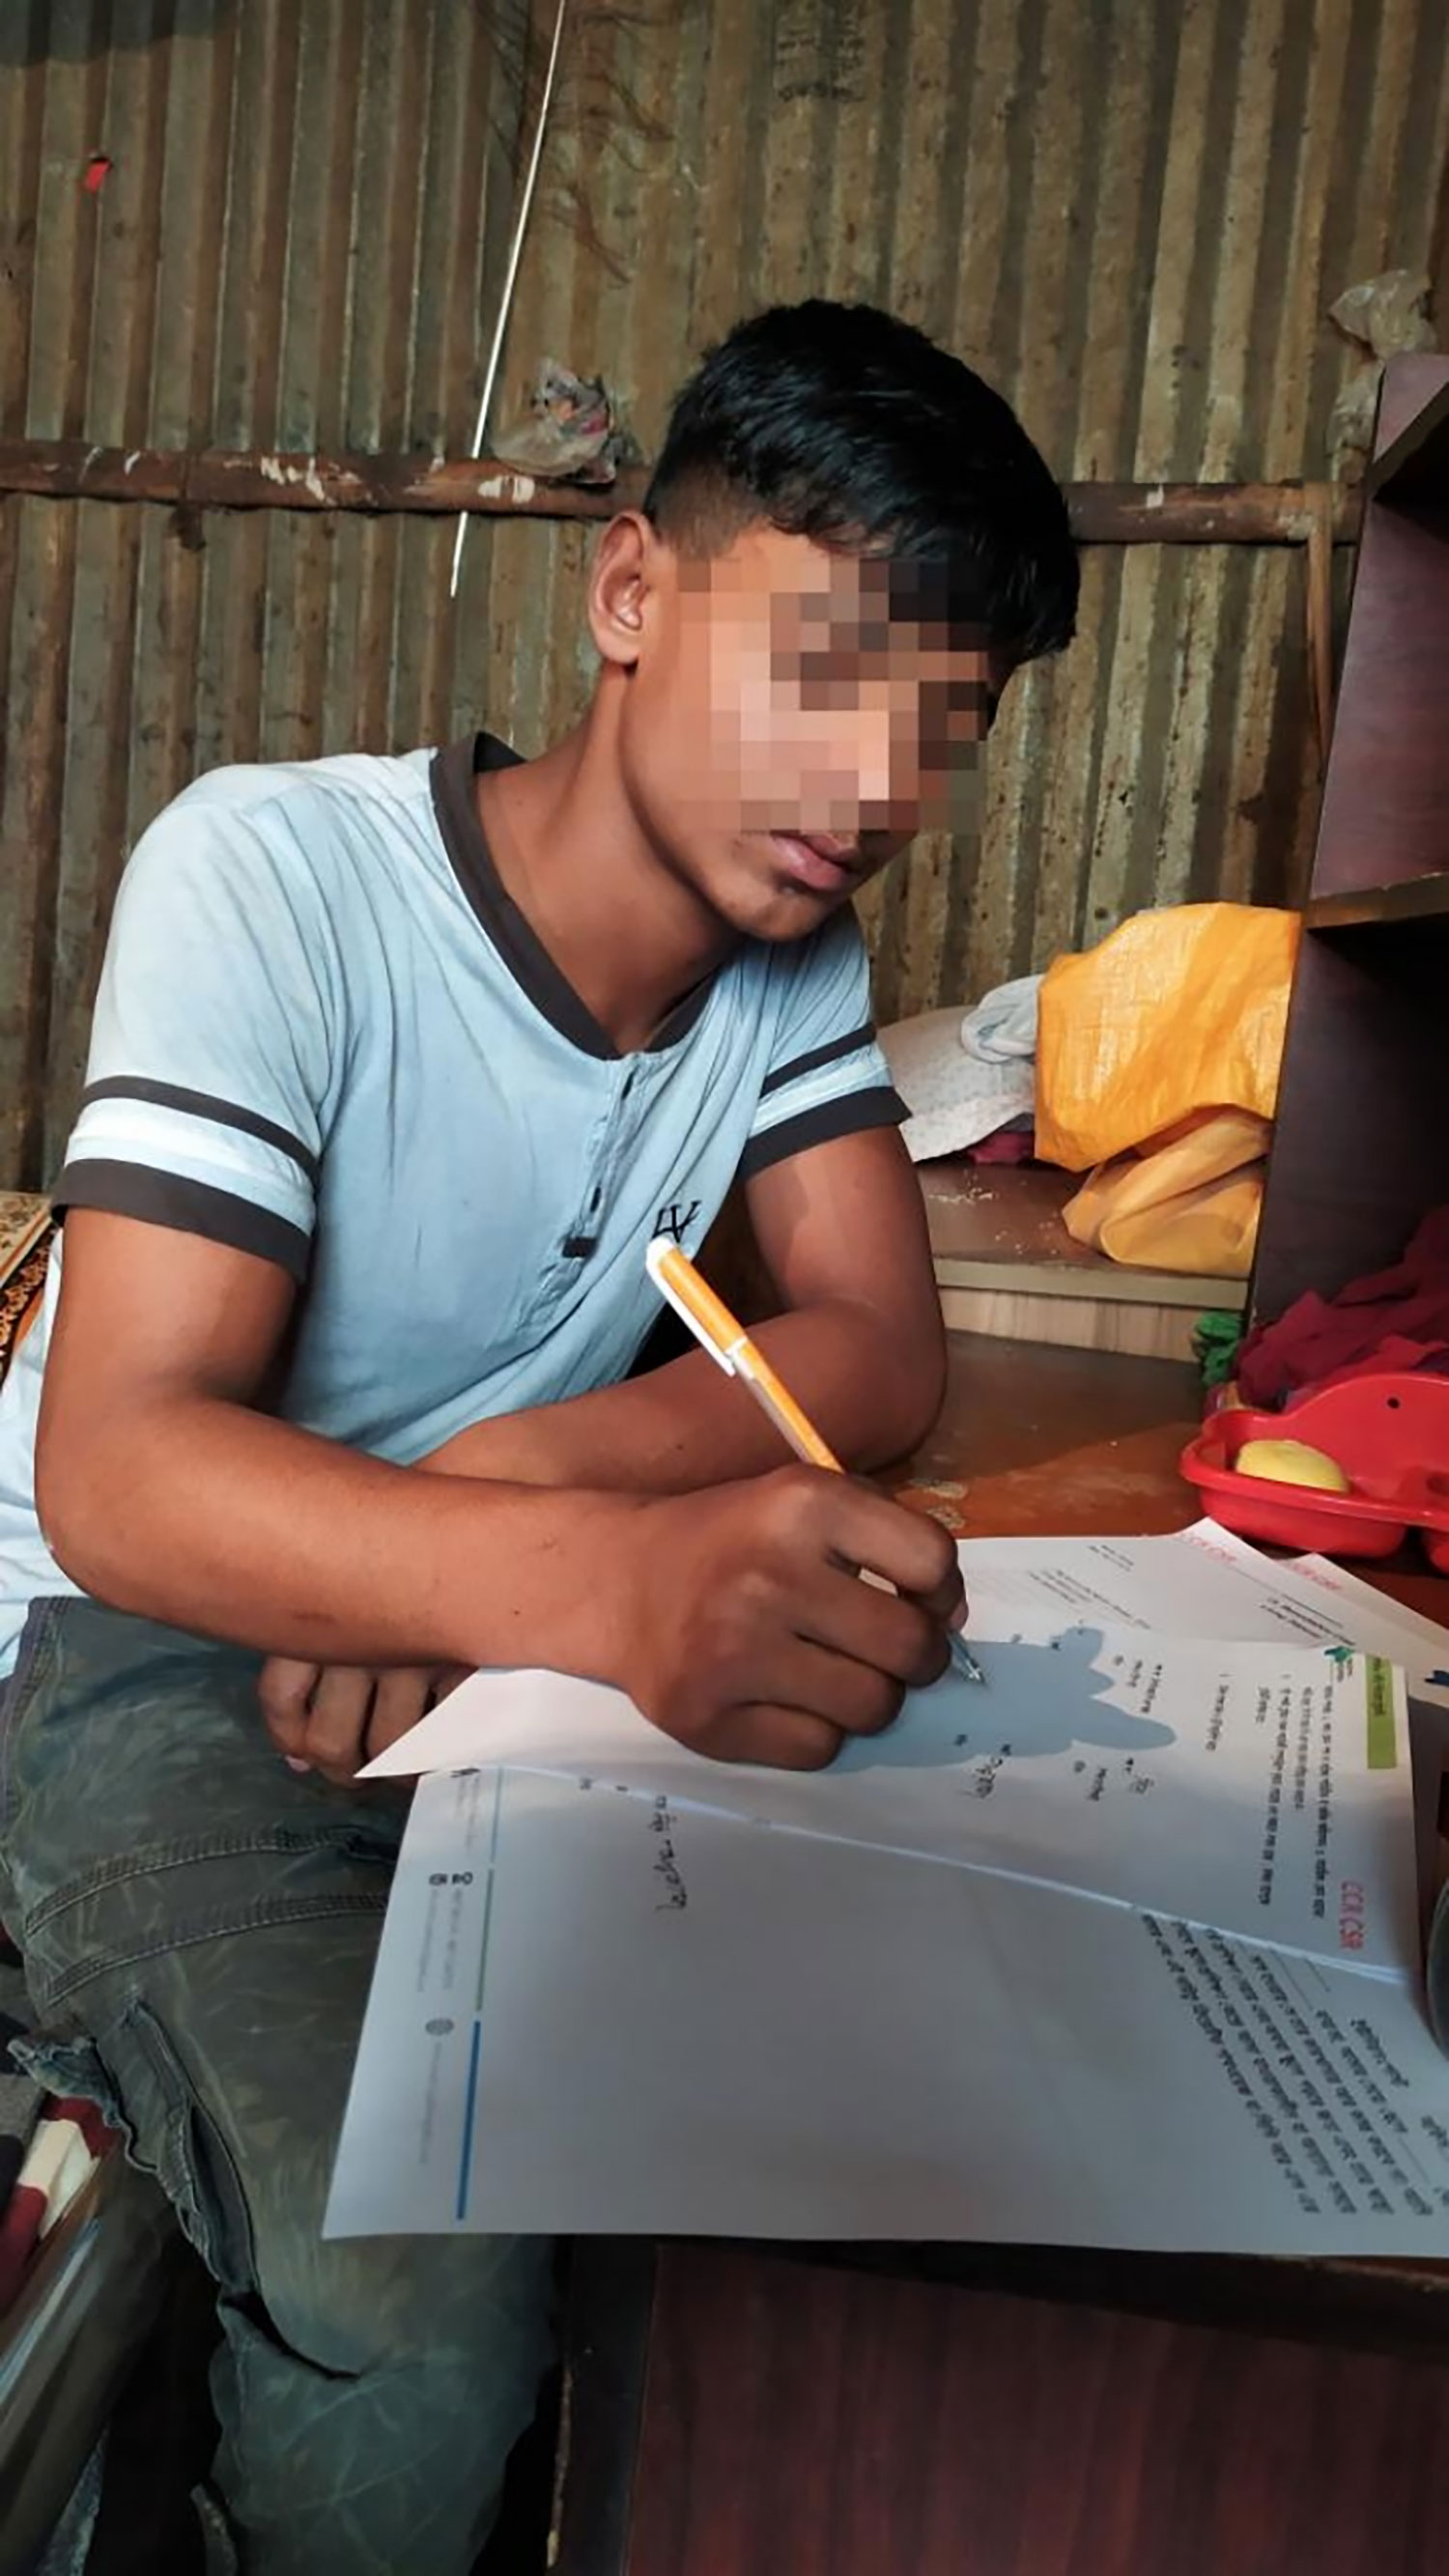 Child Labour in Focus: Bangladesh Child Labour Case Gains the Support of an Entire Village